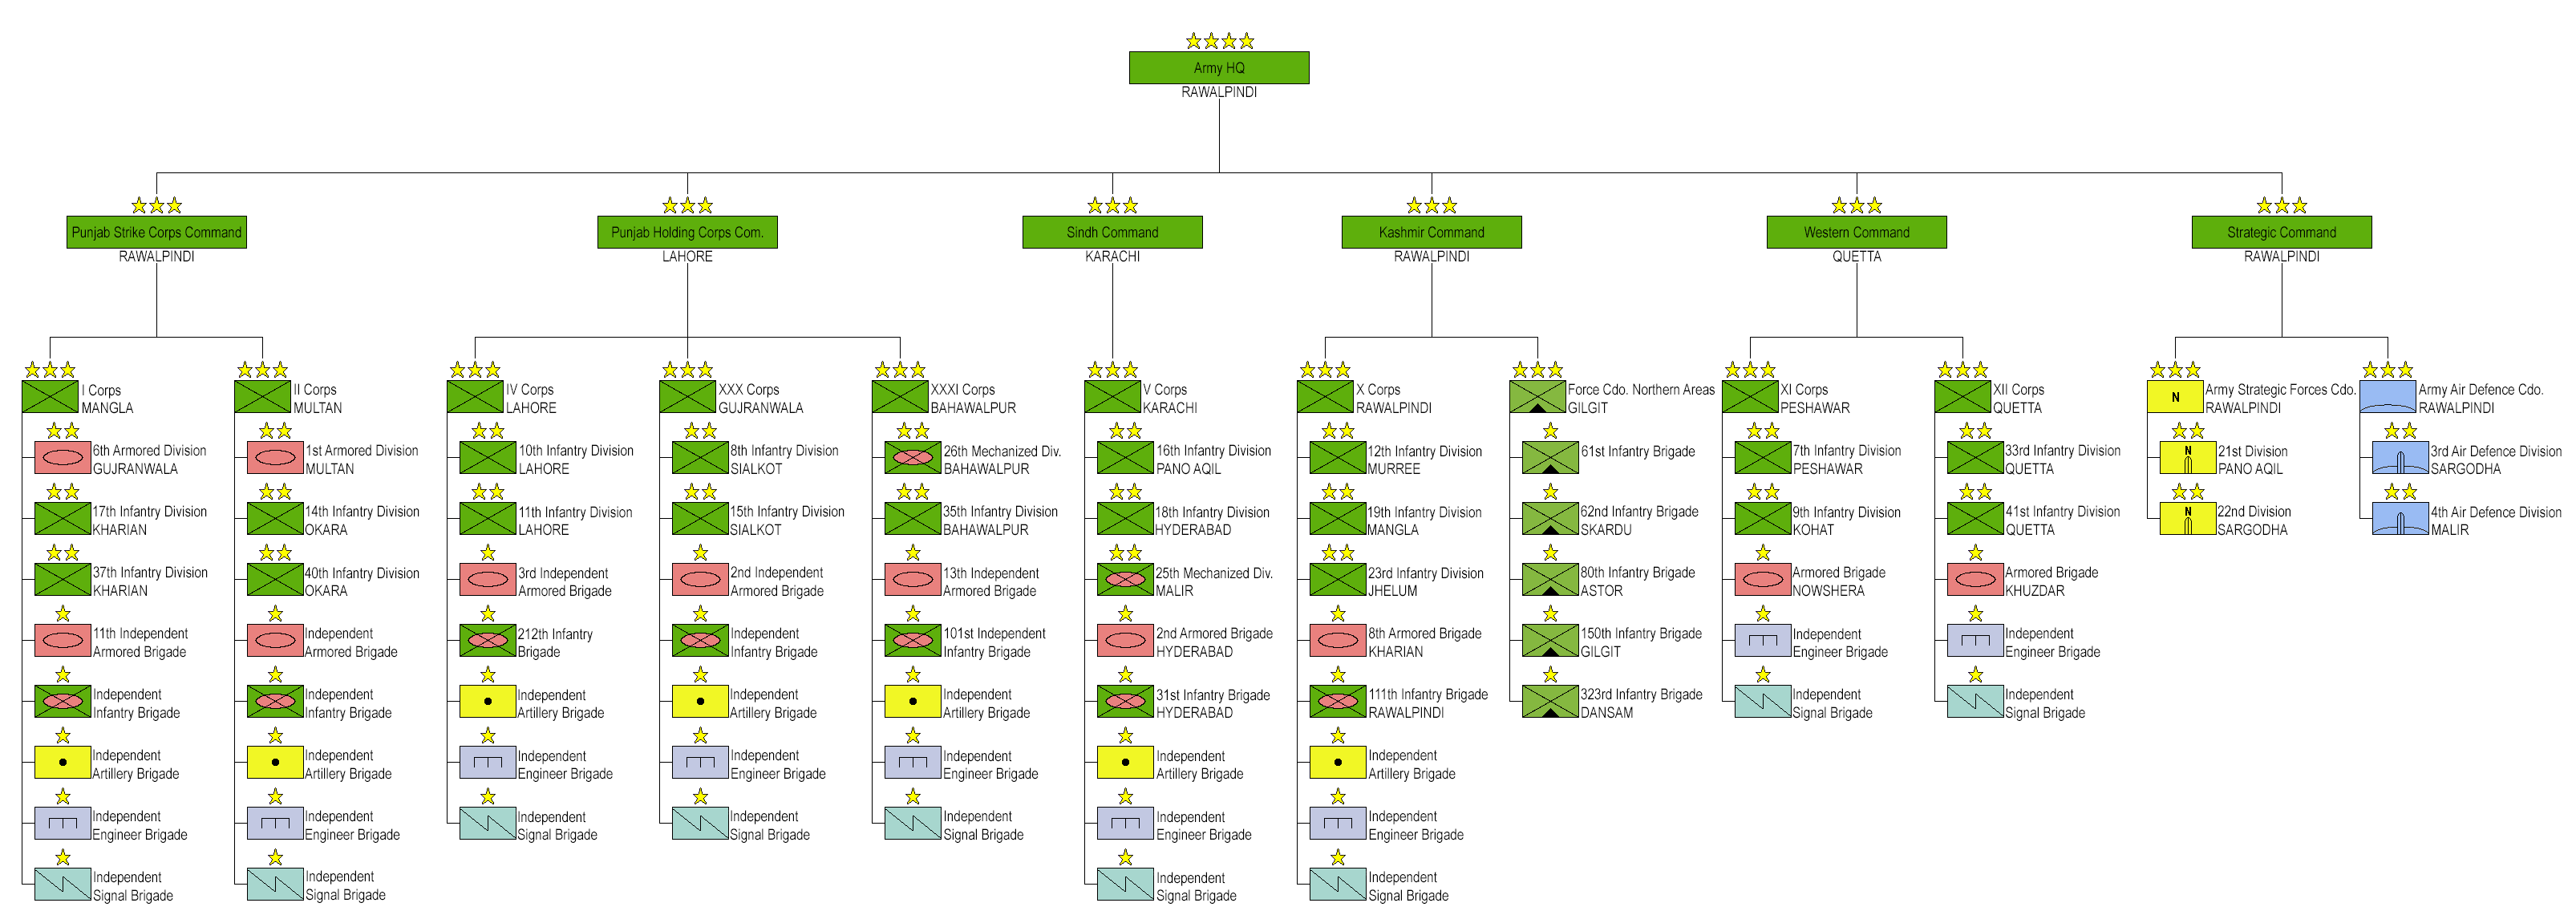 Pakistan_Army_Structure.png